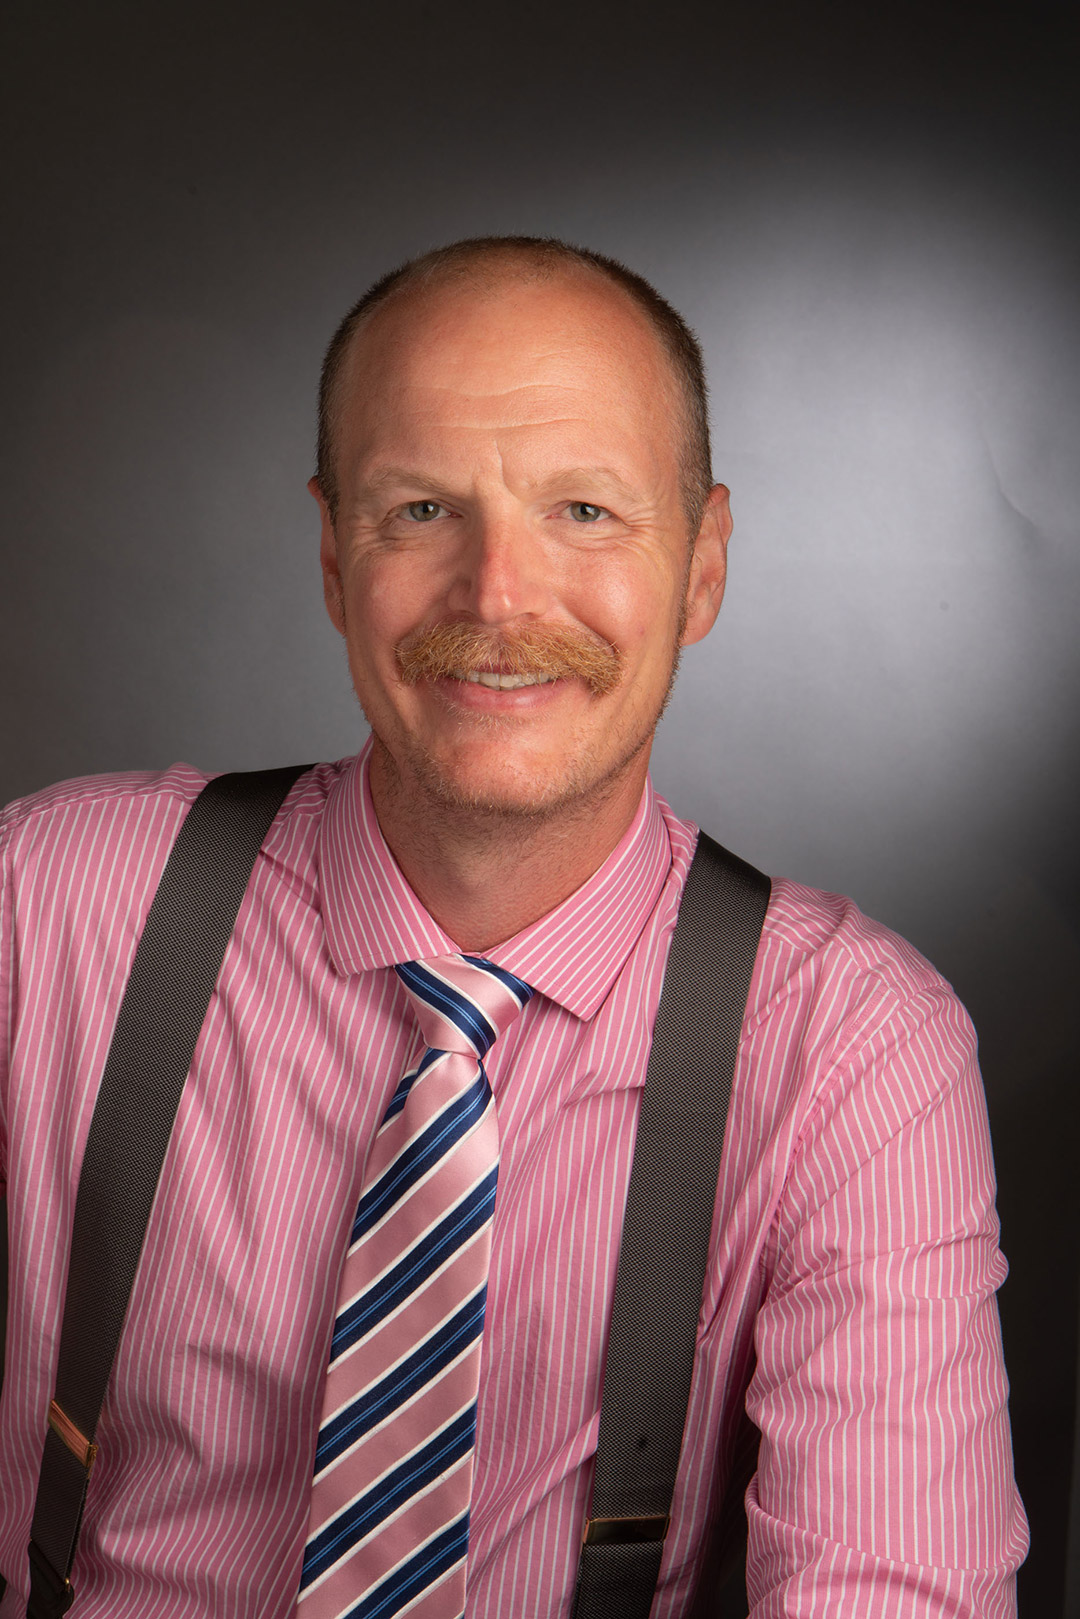 Billy Brumley appears in a headshot with a pink shirt, striped tie, and dark suspenders.